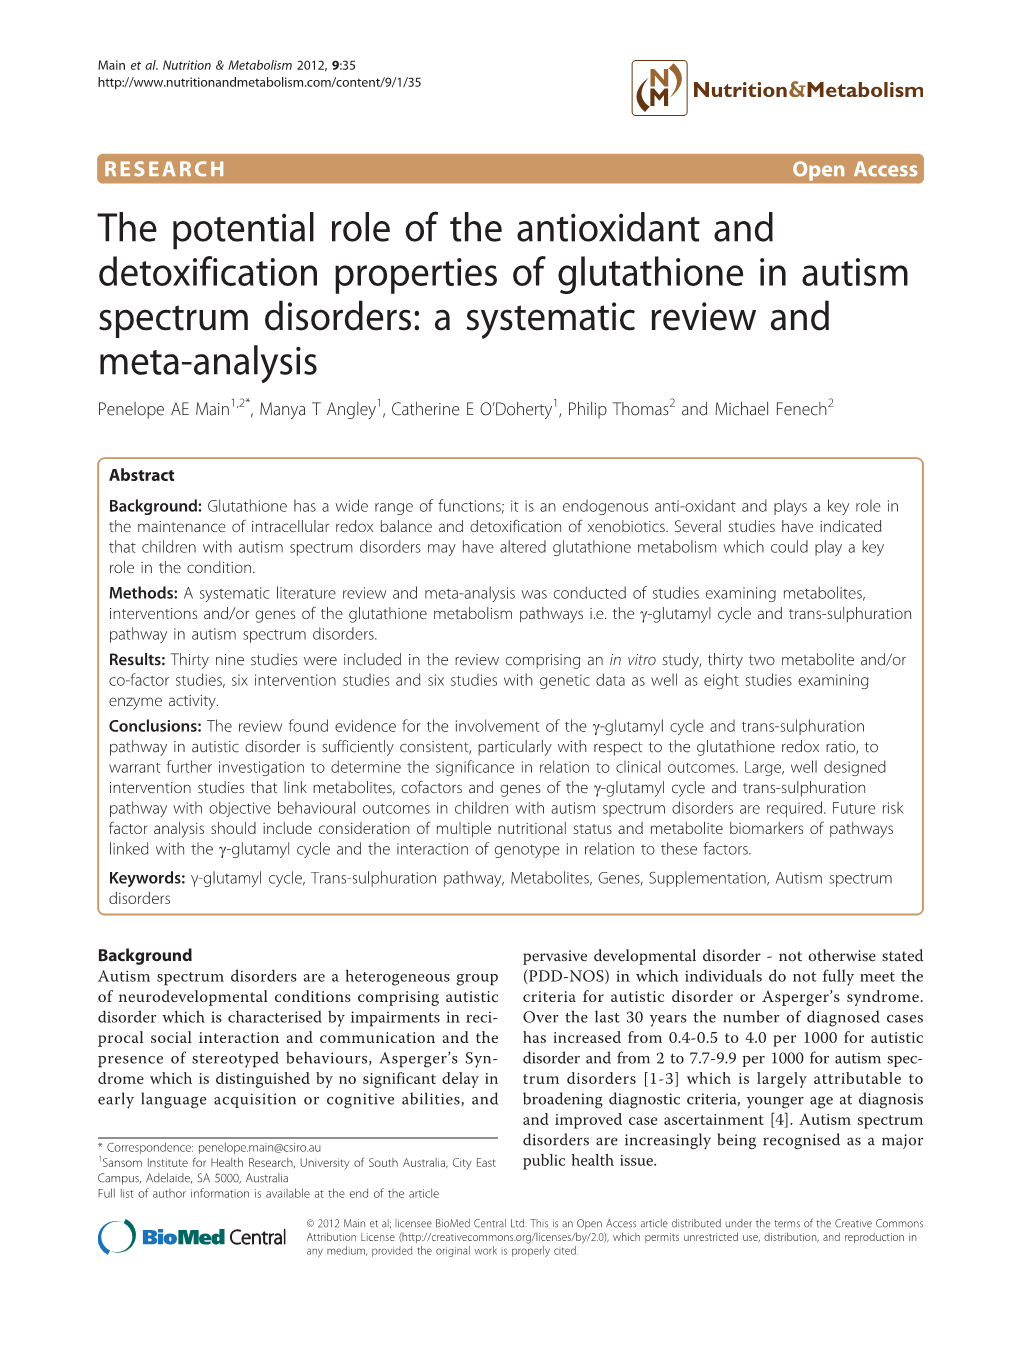 The Potential Role of the Antioxidant And